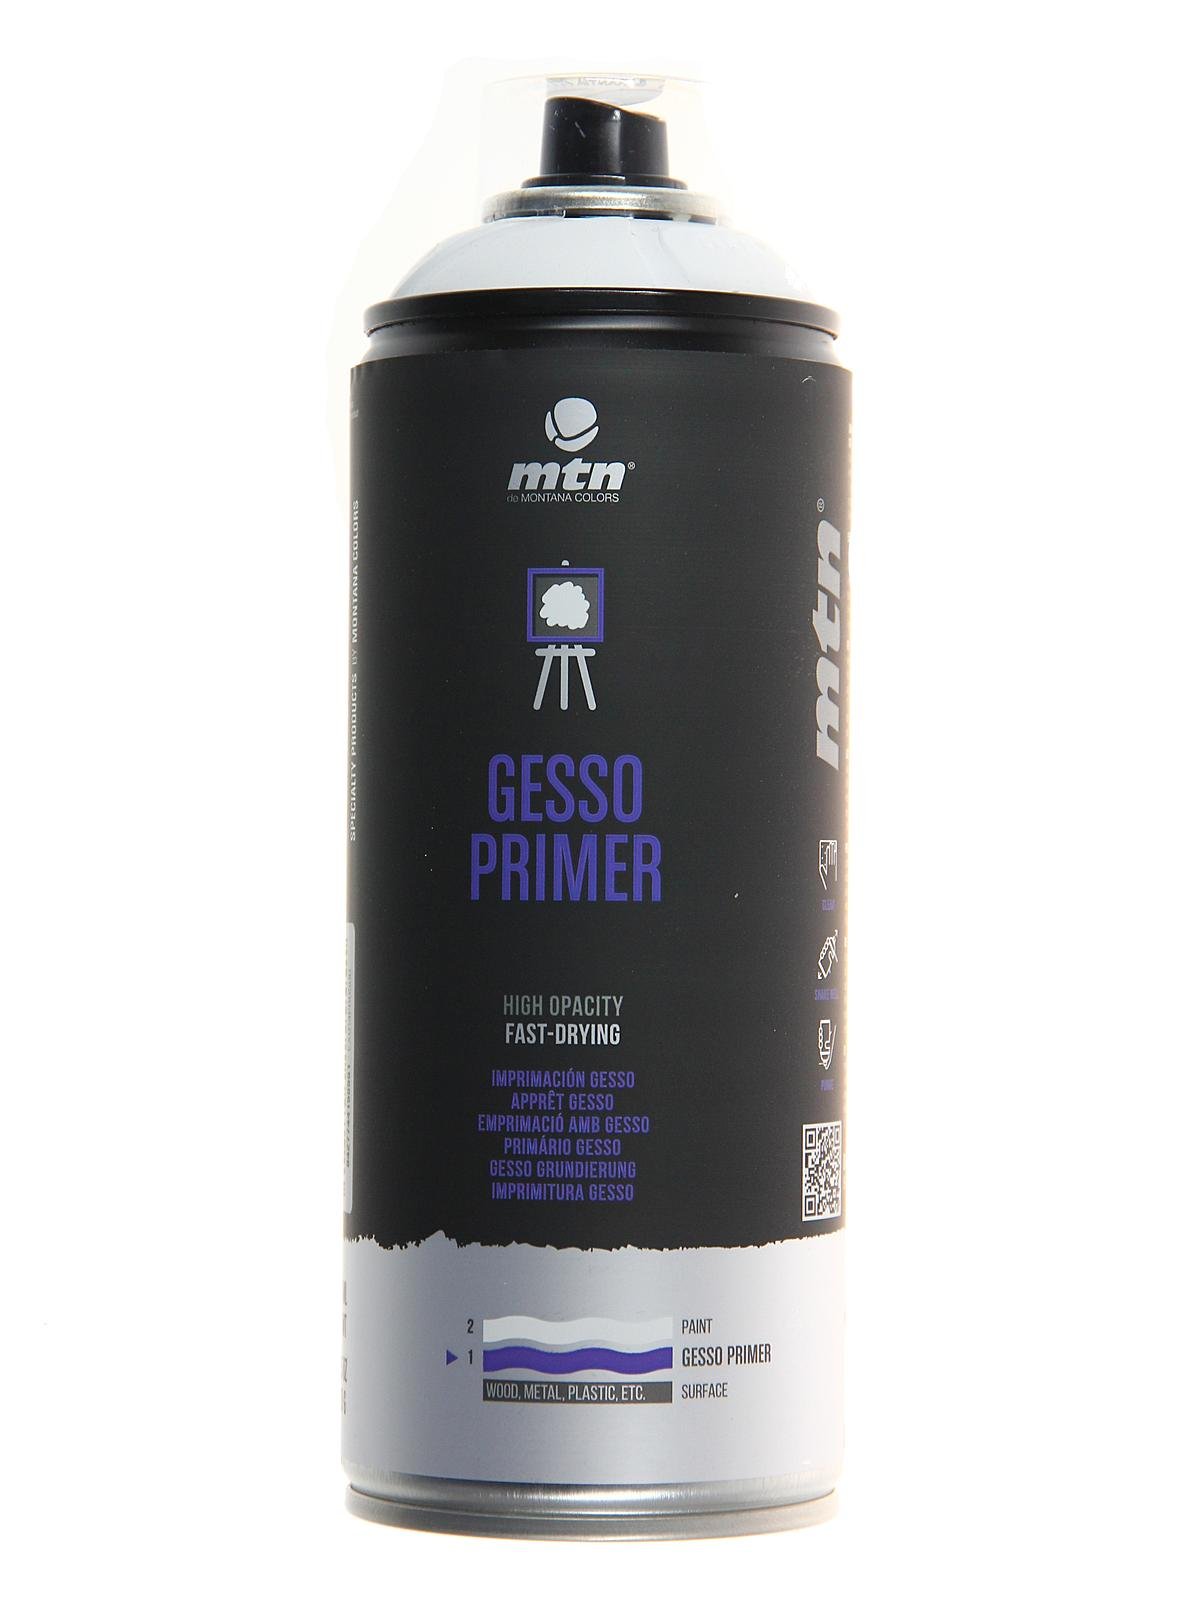 How to apply a Gesso Primer before painting. Why use a Gesso Primer 